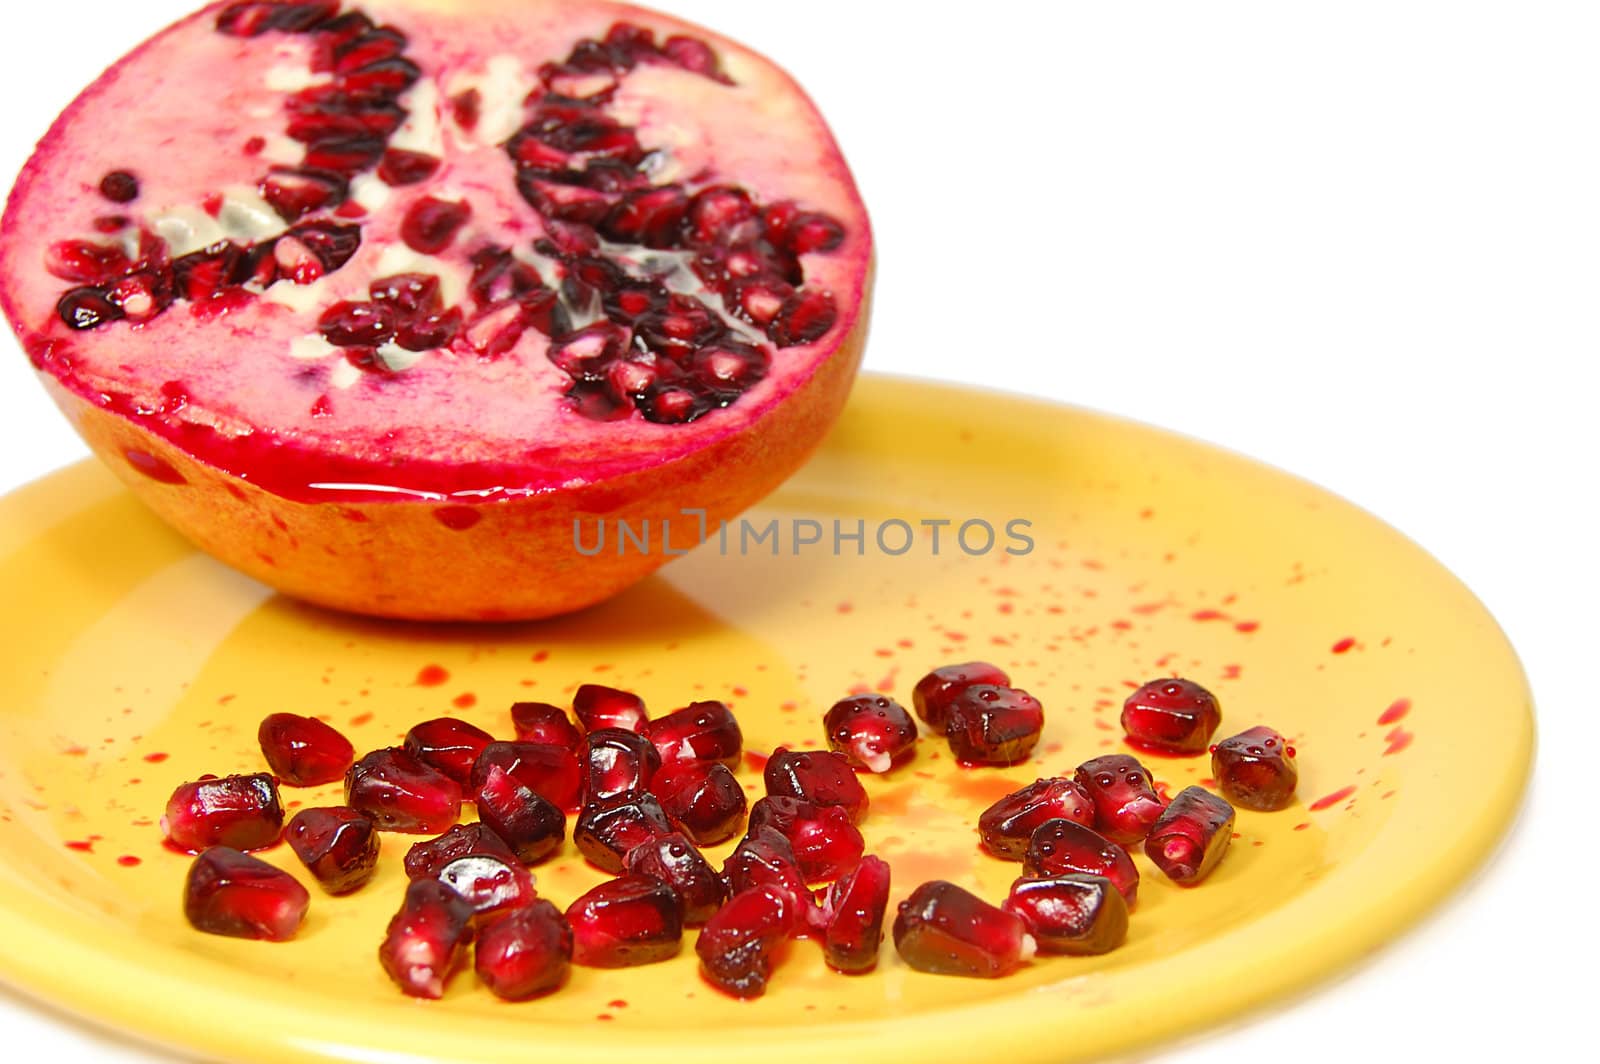 Pomegranate by Angel_a